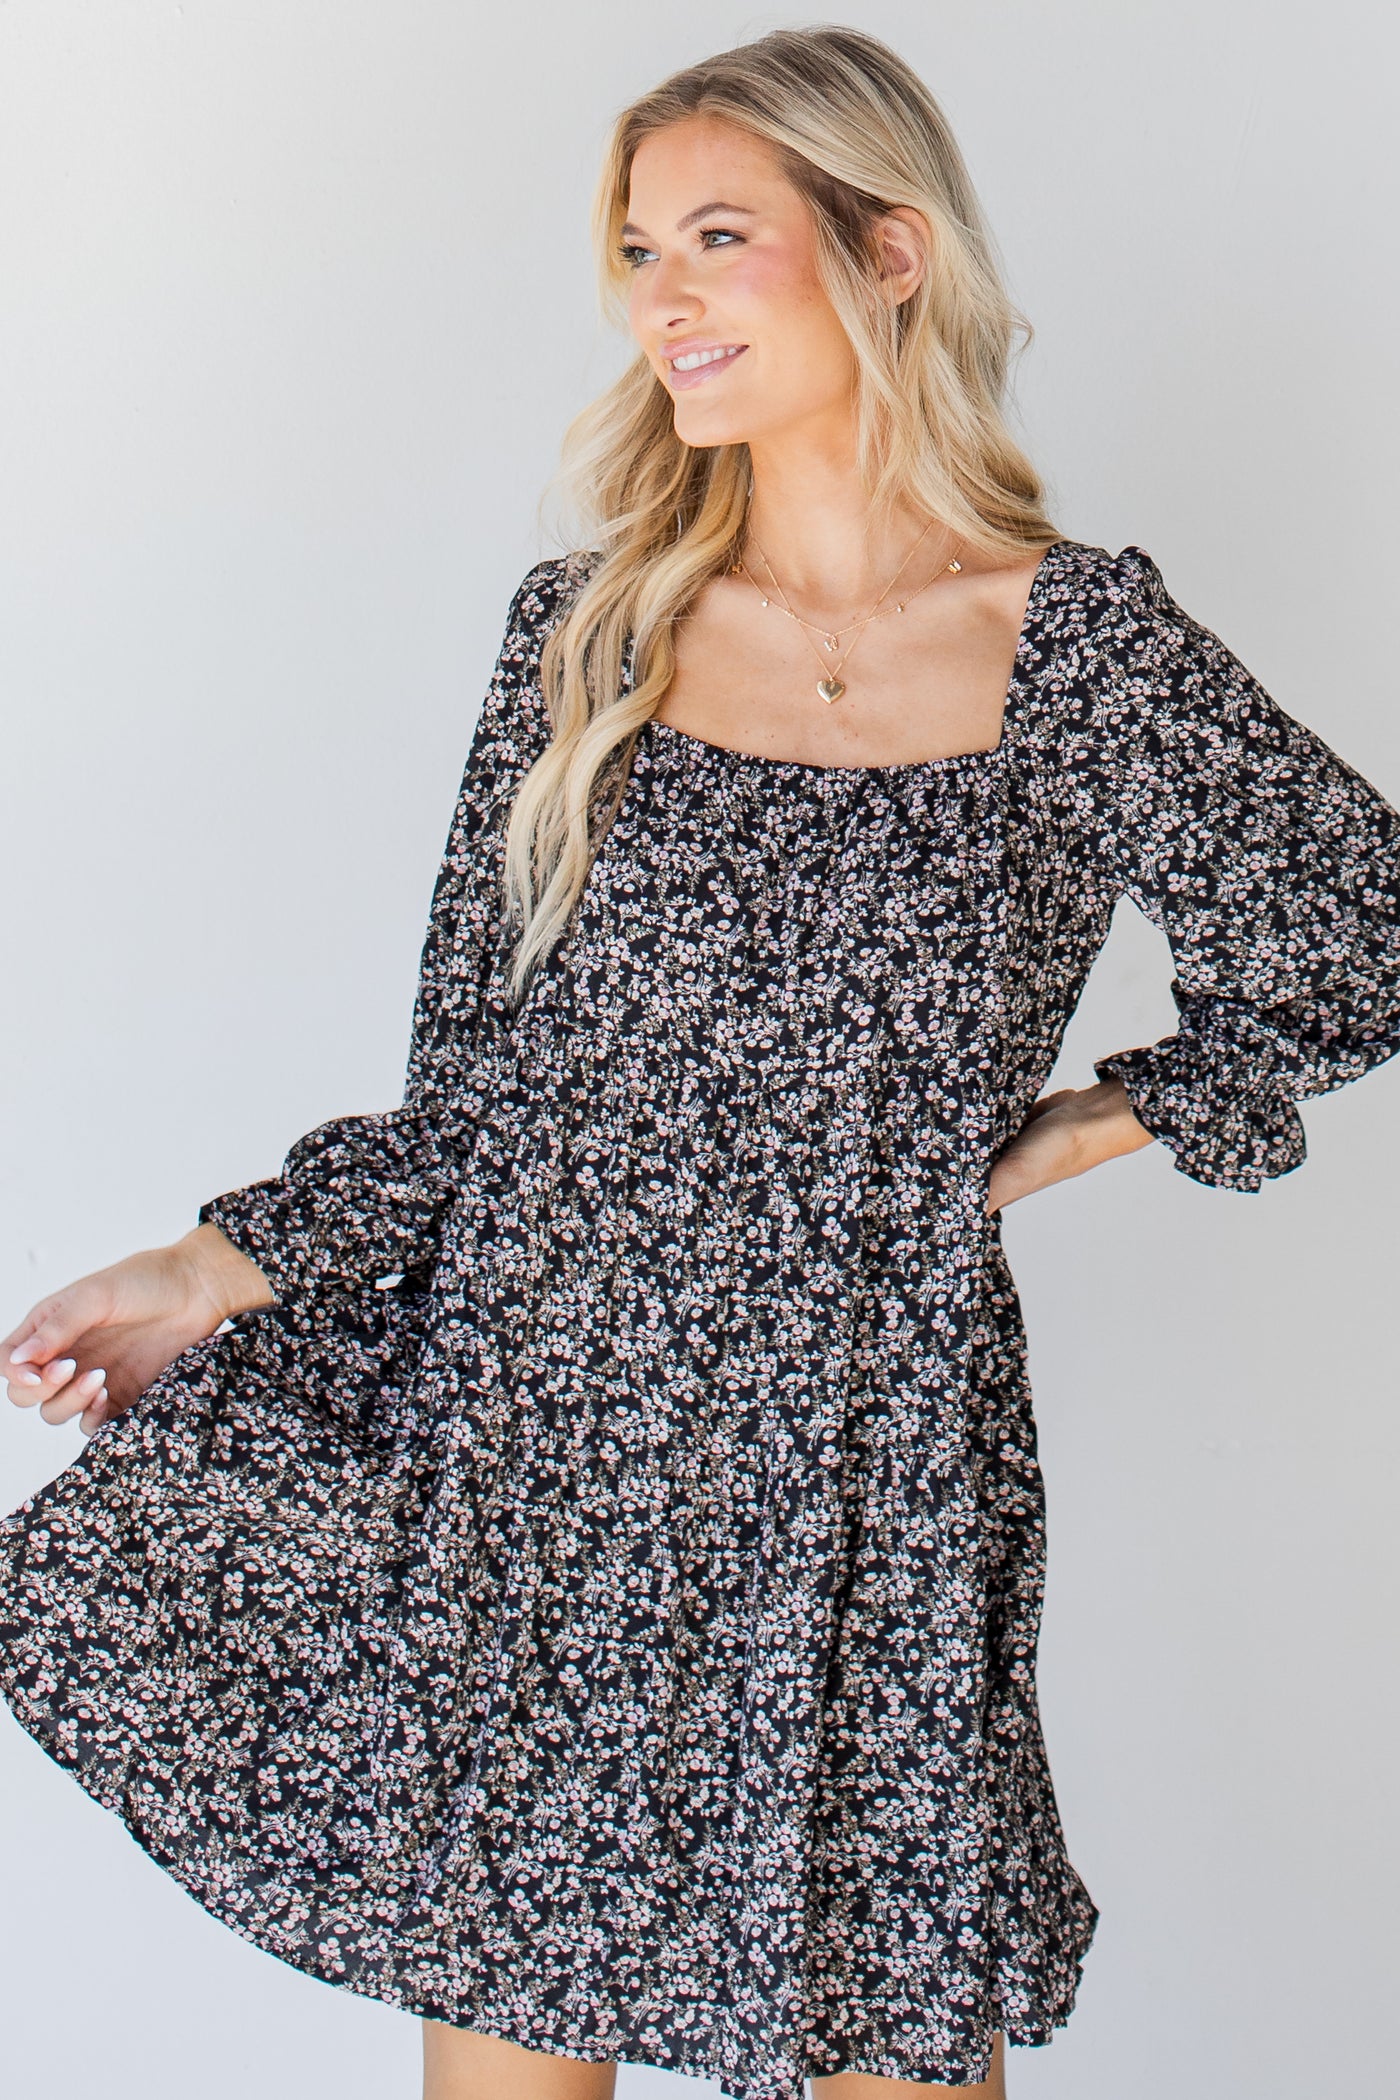 Tiered Floral Dress from dress up